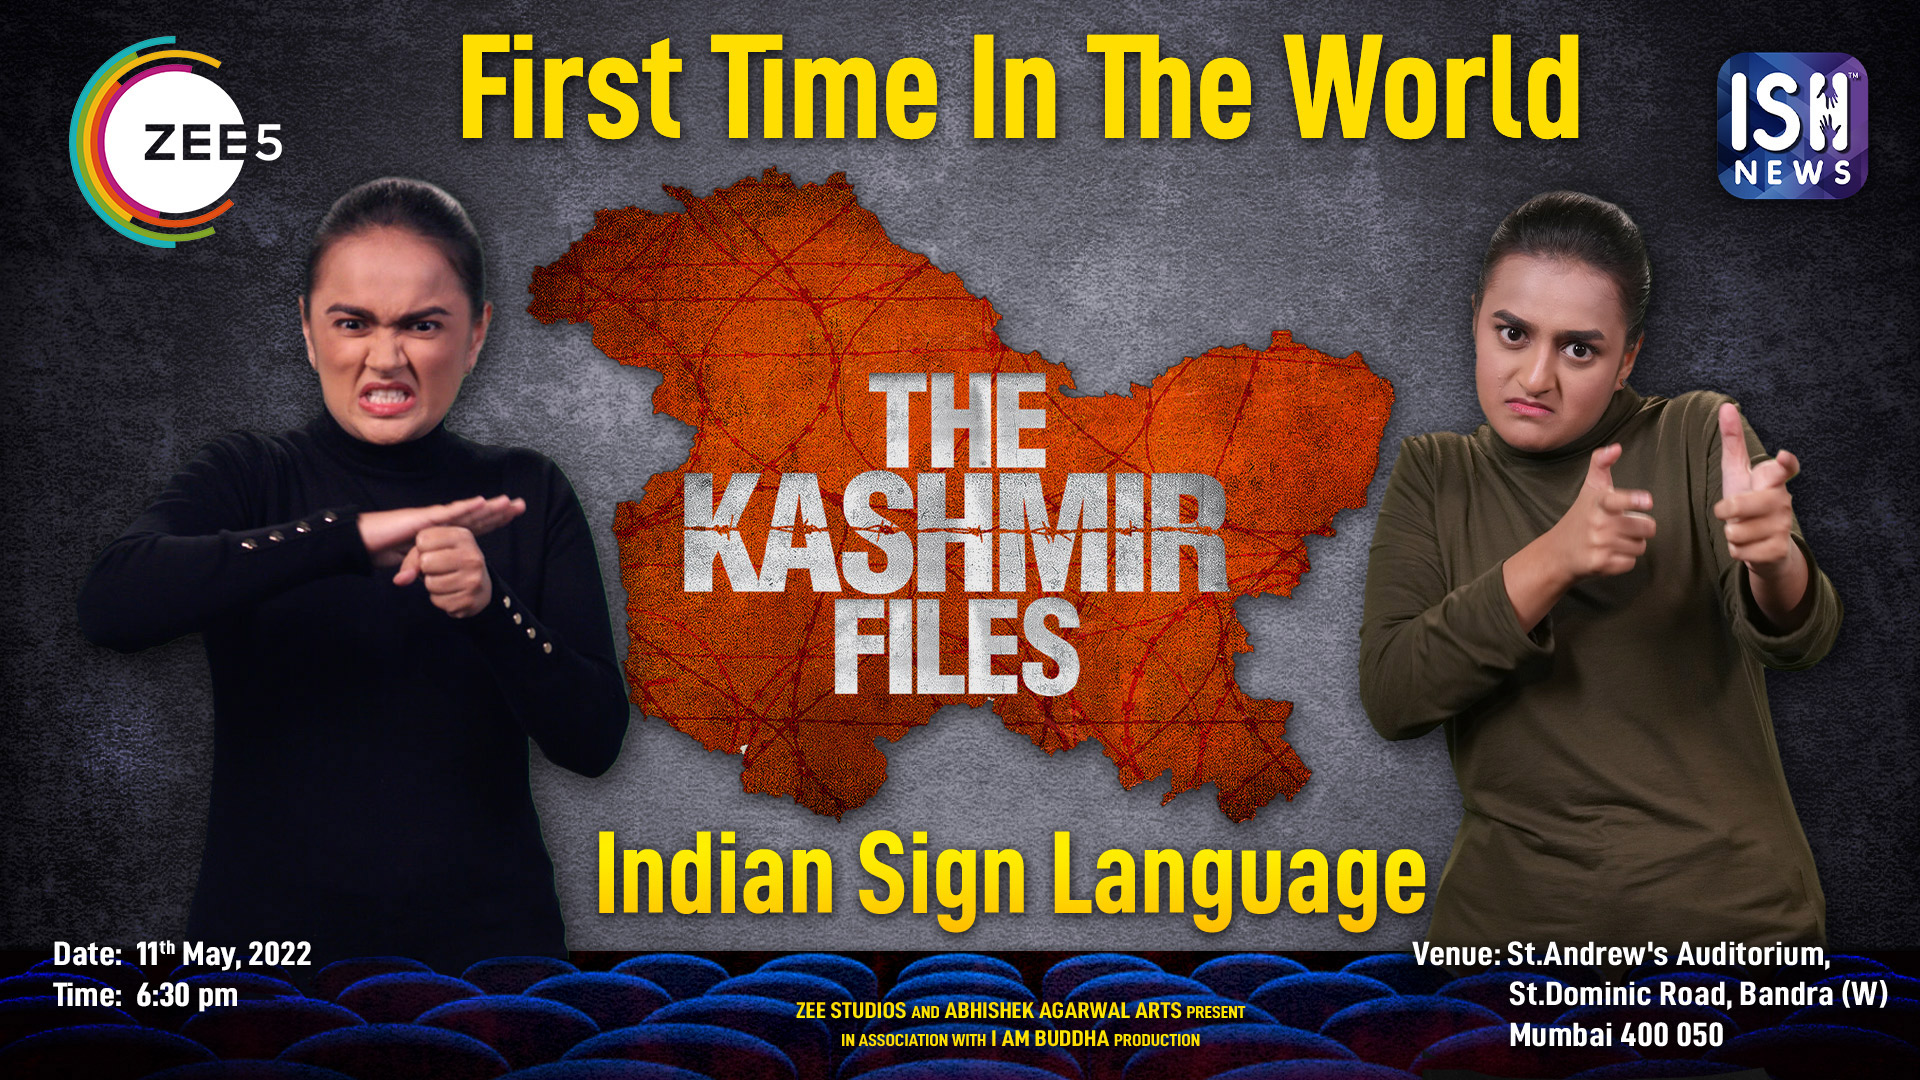 The Kashmir Files in Indian Sign Language